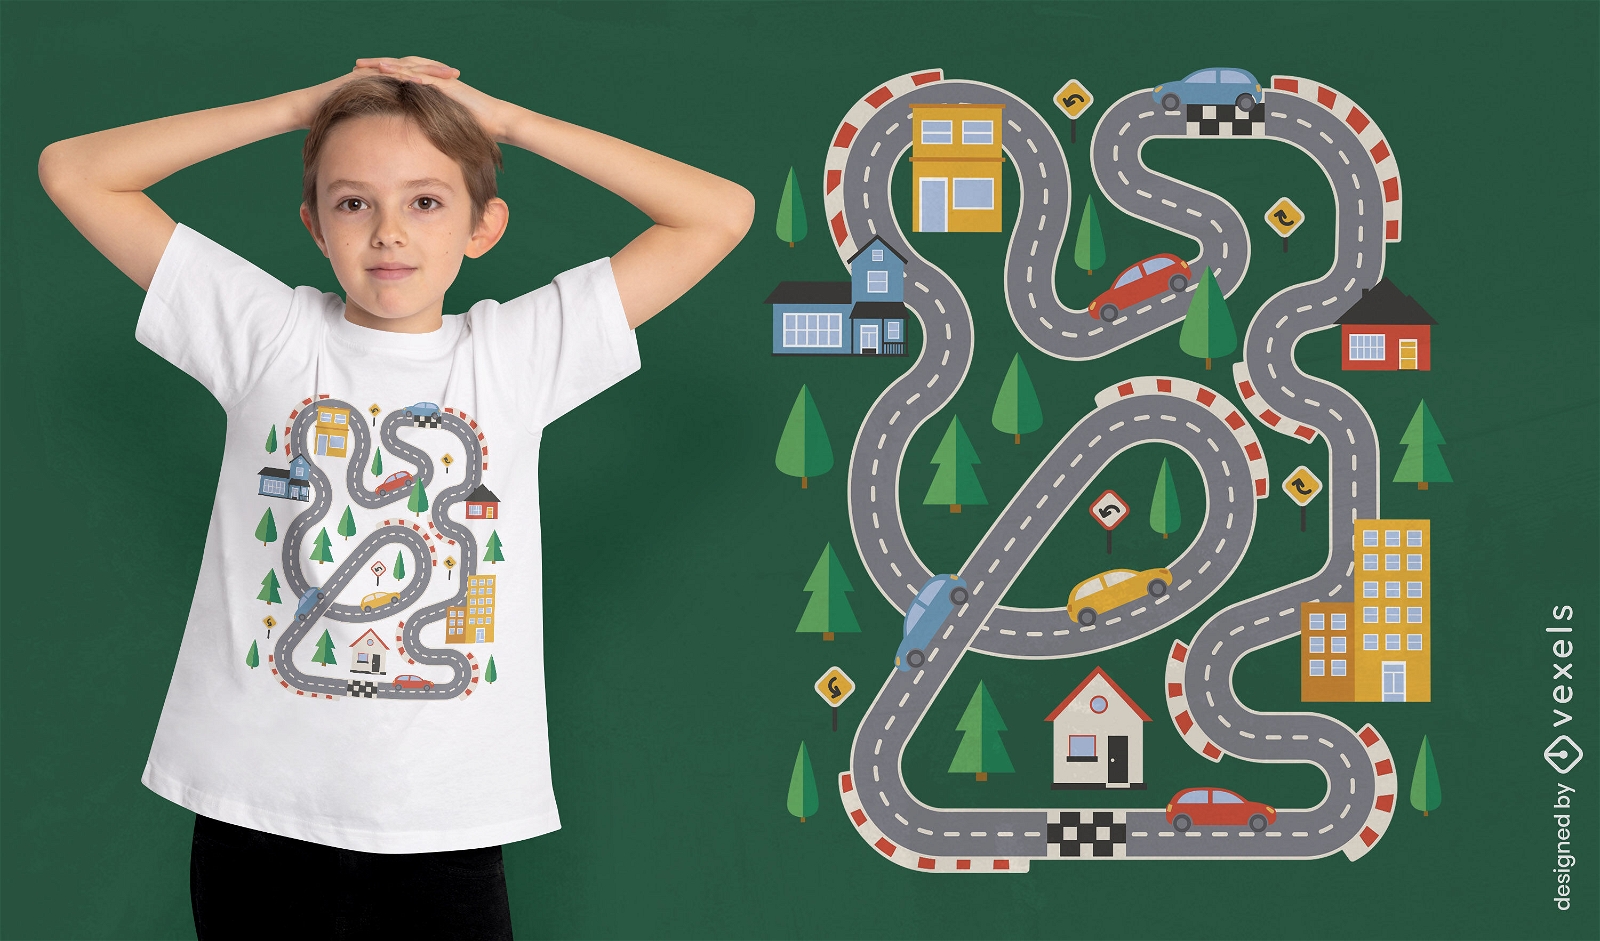 Racing track with cars t-shirt design